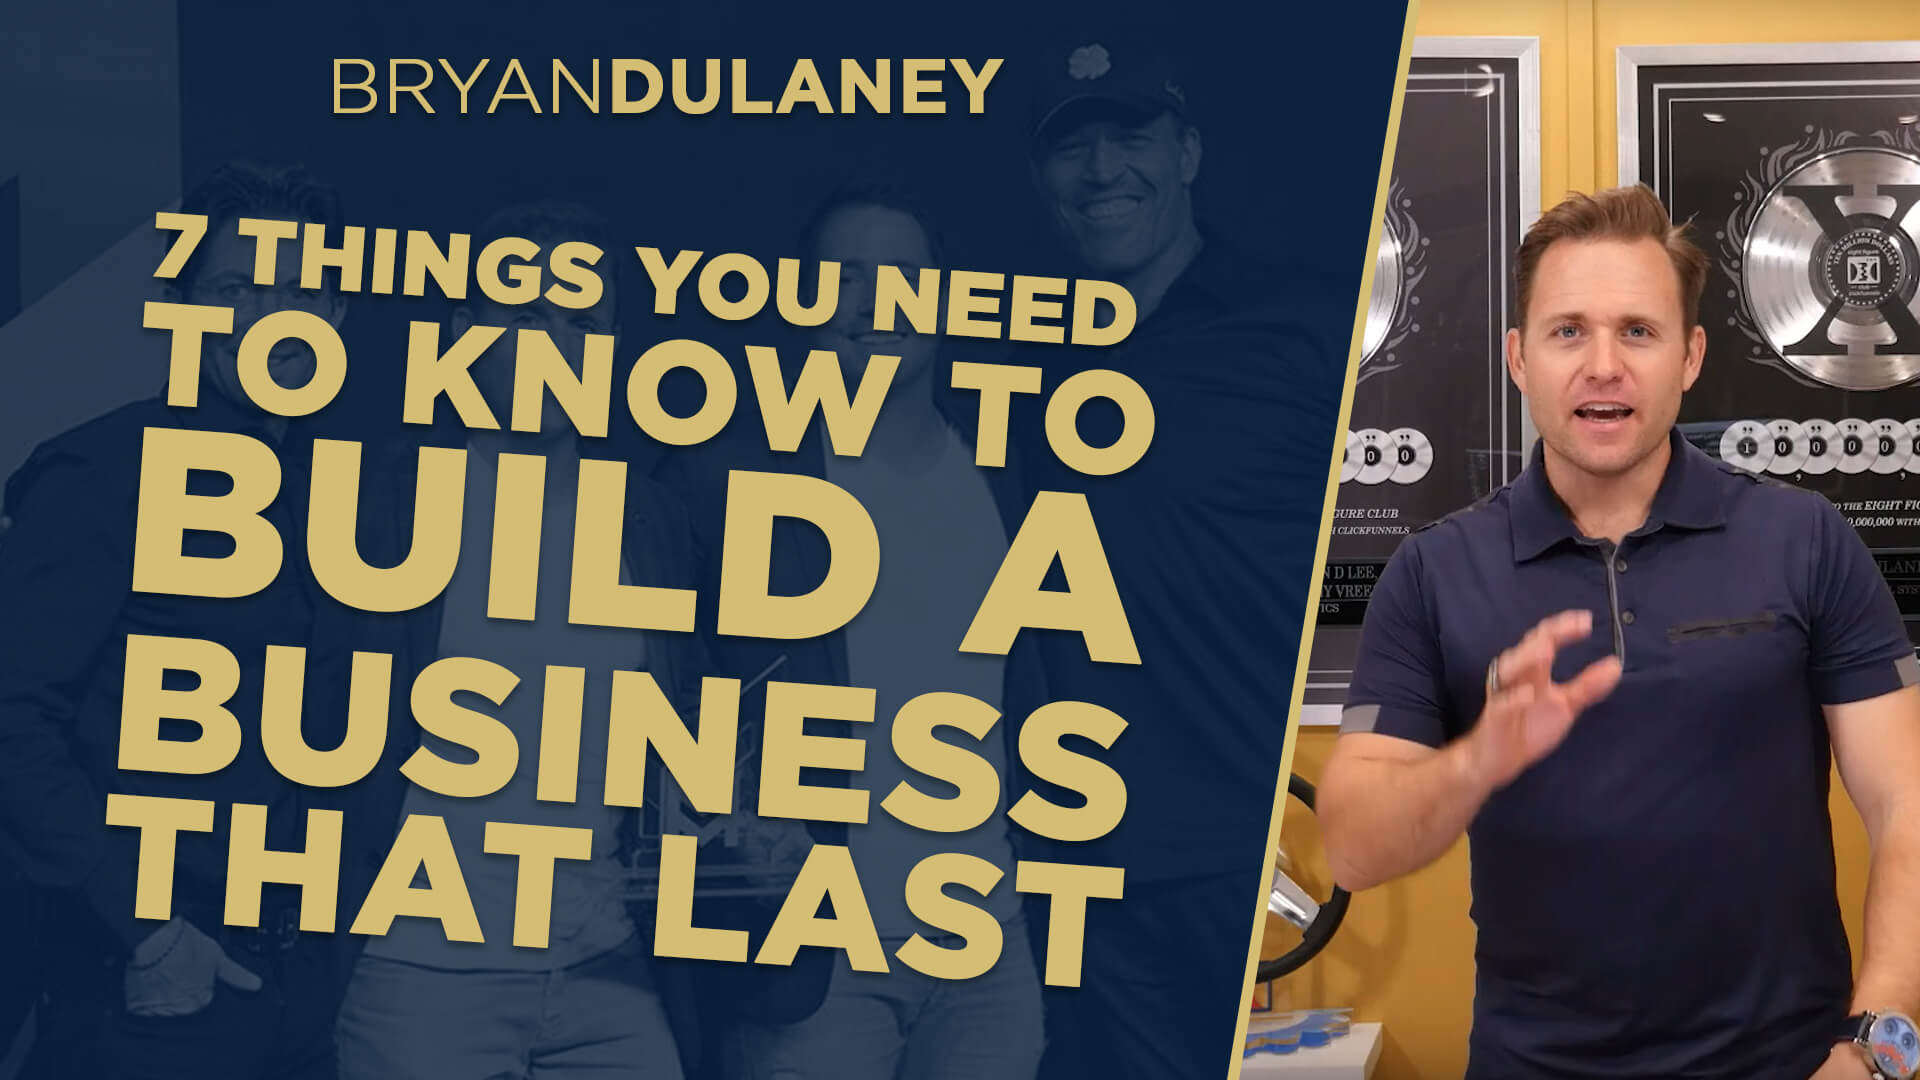 7 Things You Need To Know To Build A Business That Lasts